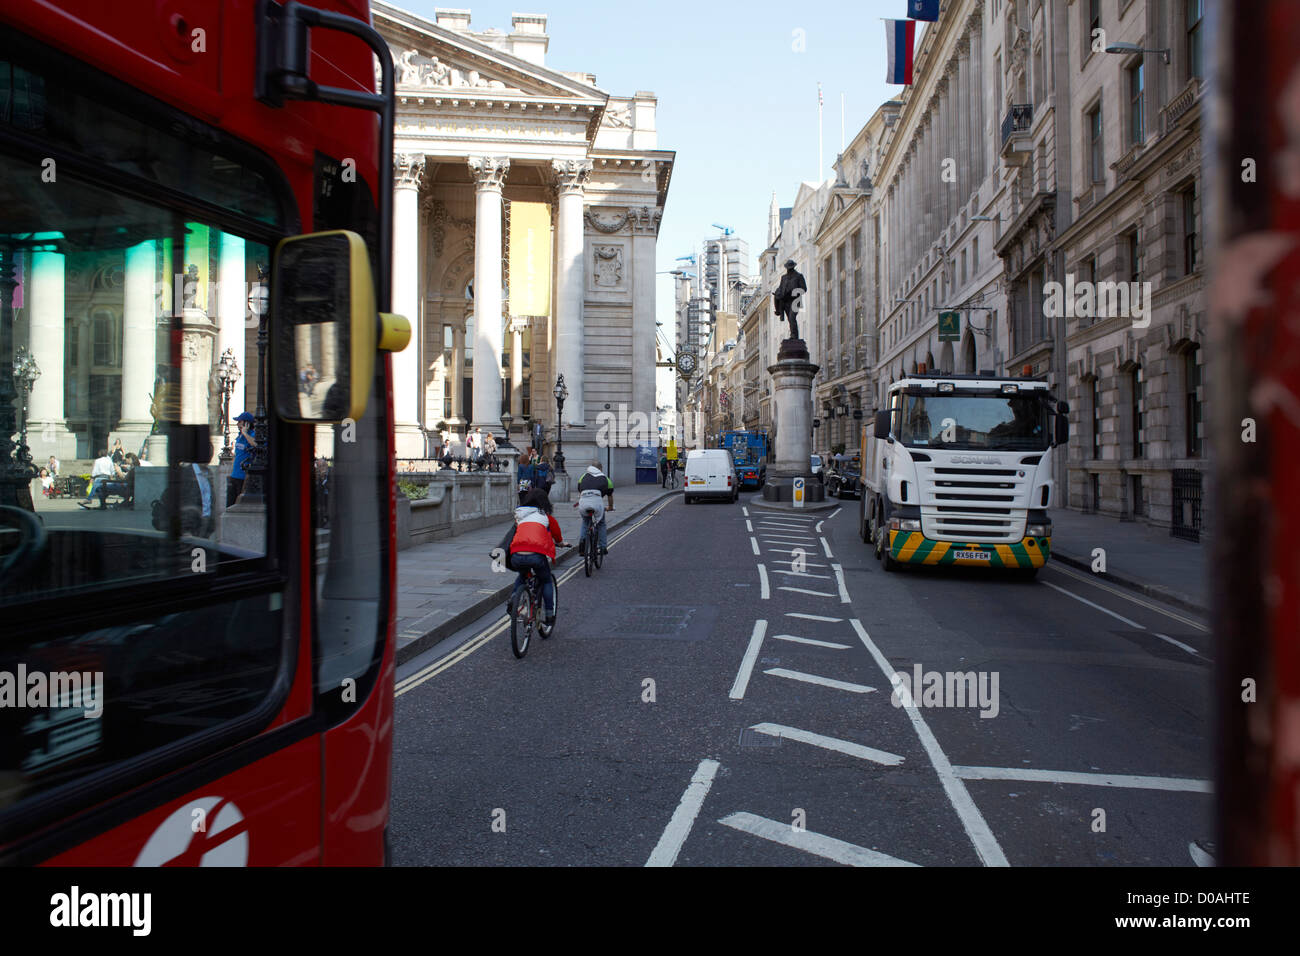 Buses and heavy traffic in narrow street, Cornhill, City of London Stock Photo